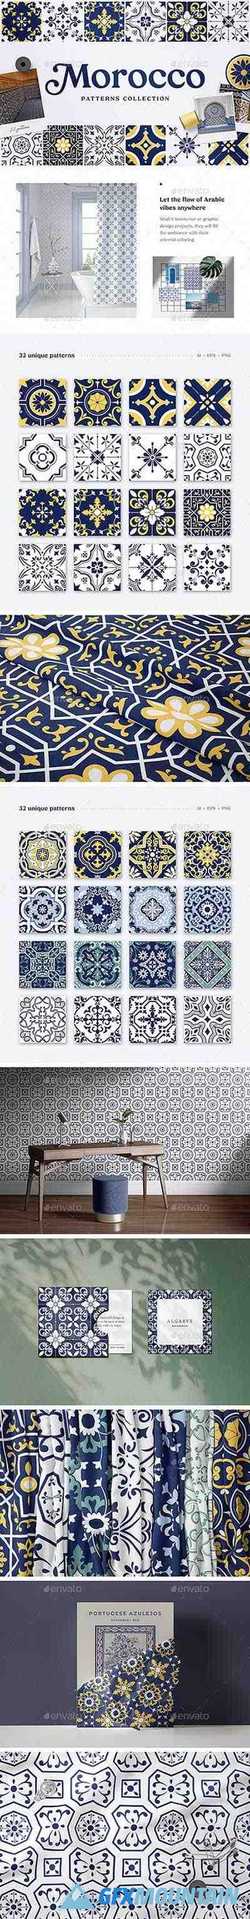 Moroccan Patterns and Ornaments